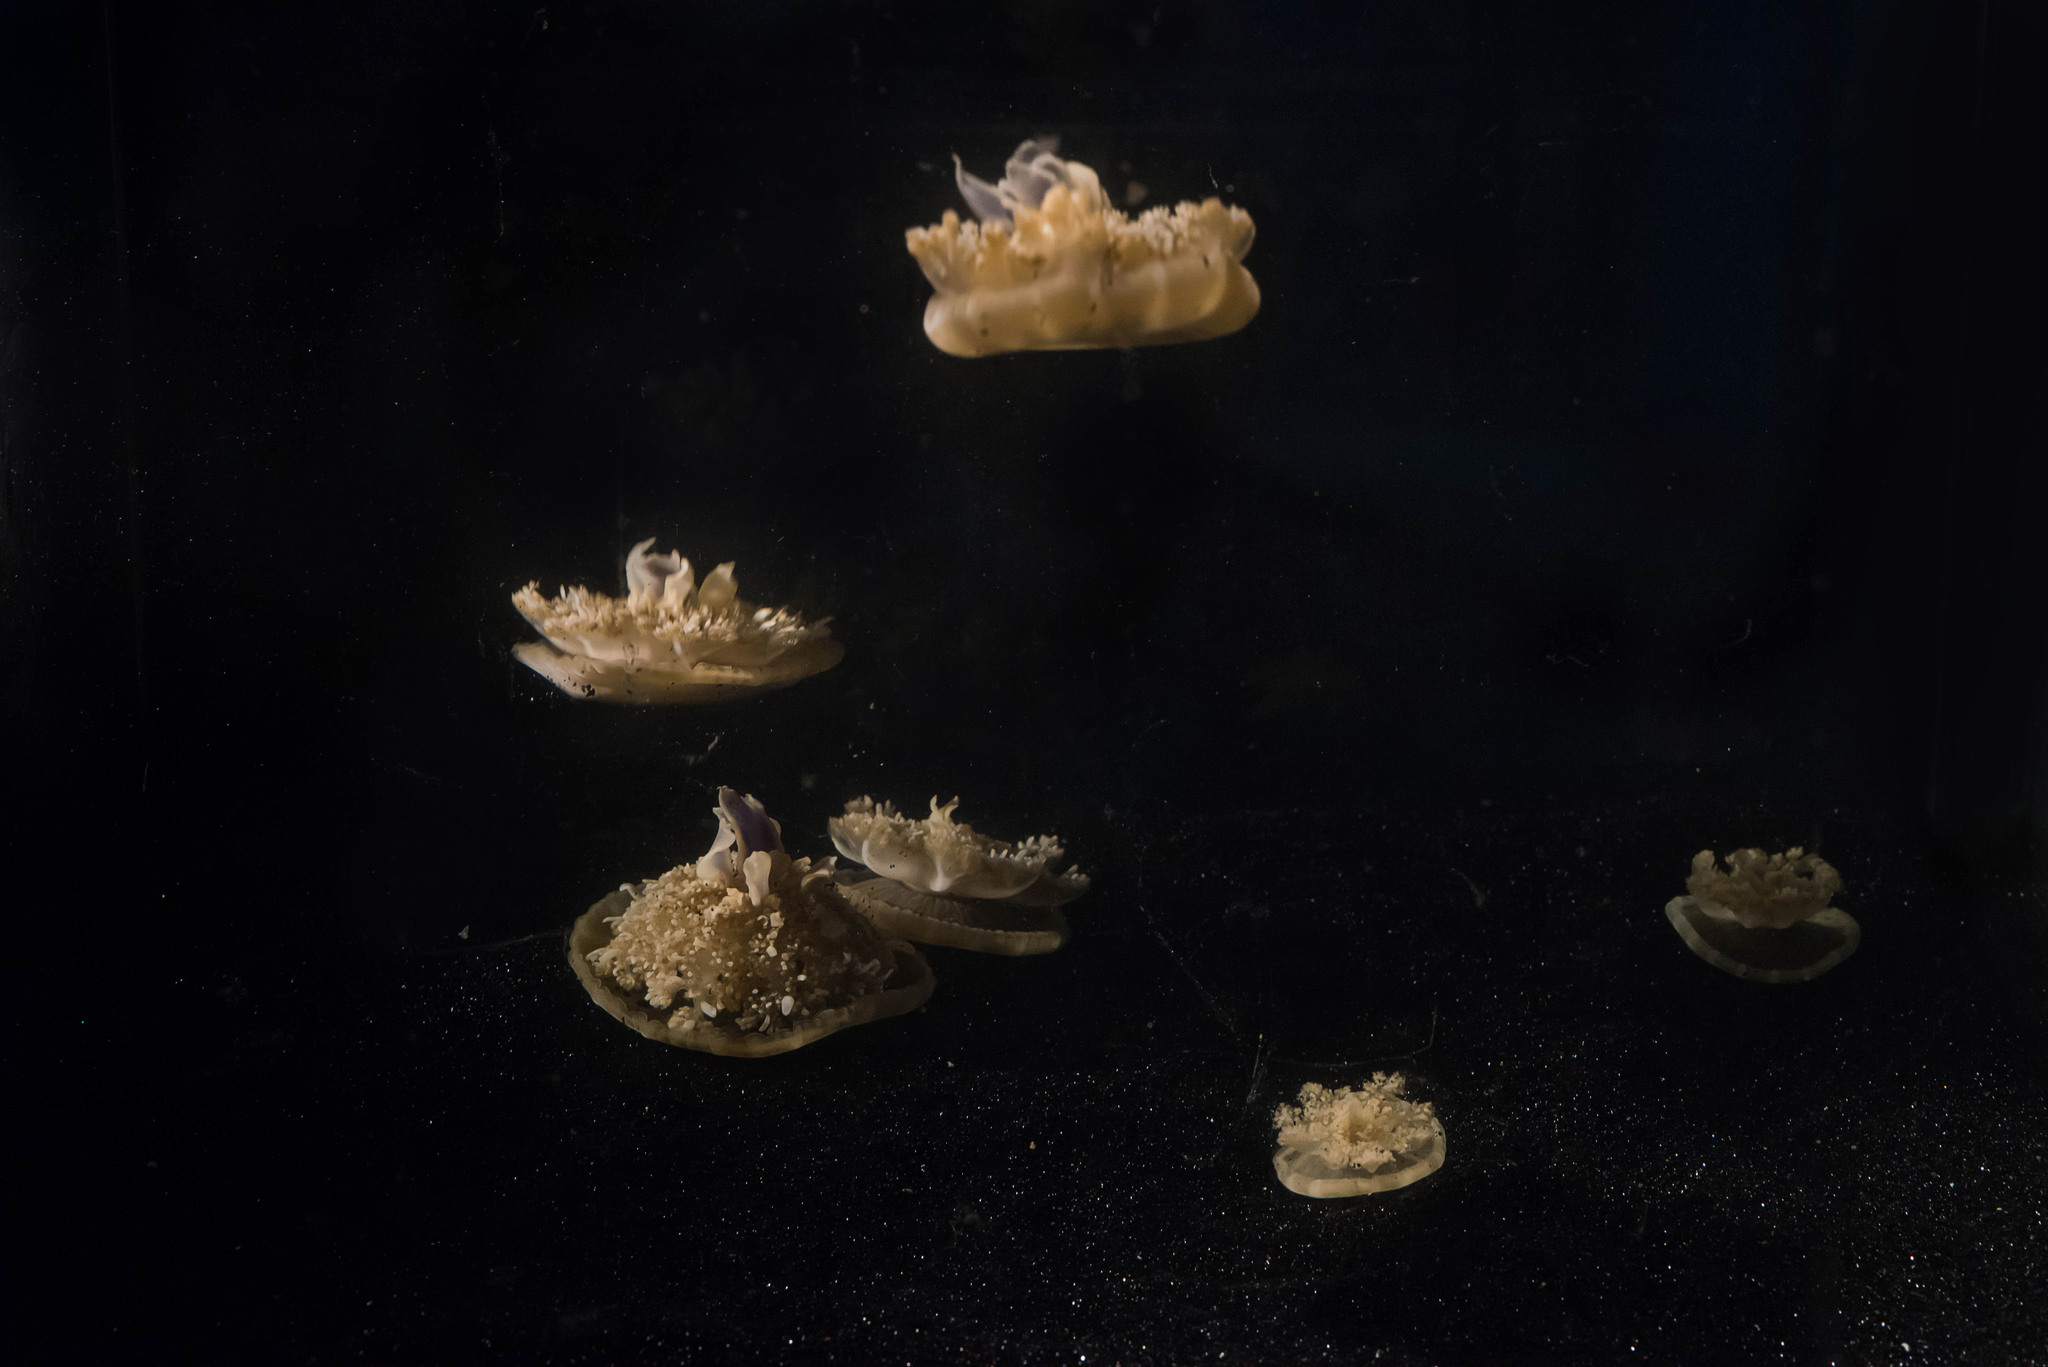 Brainless Jellyfish Are Making Us Rethink Our Understanding Of Sleep